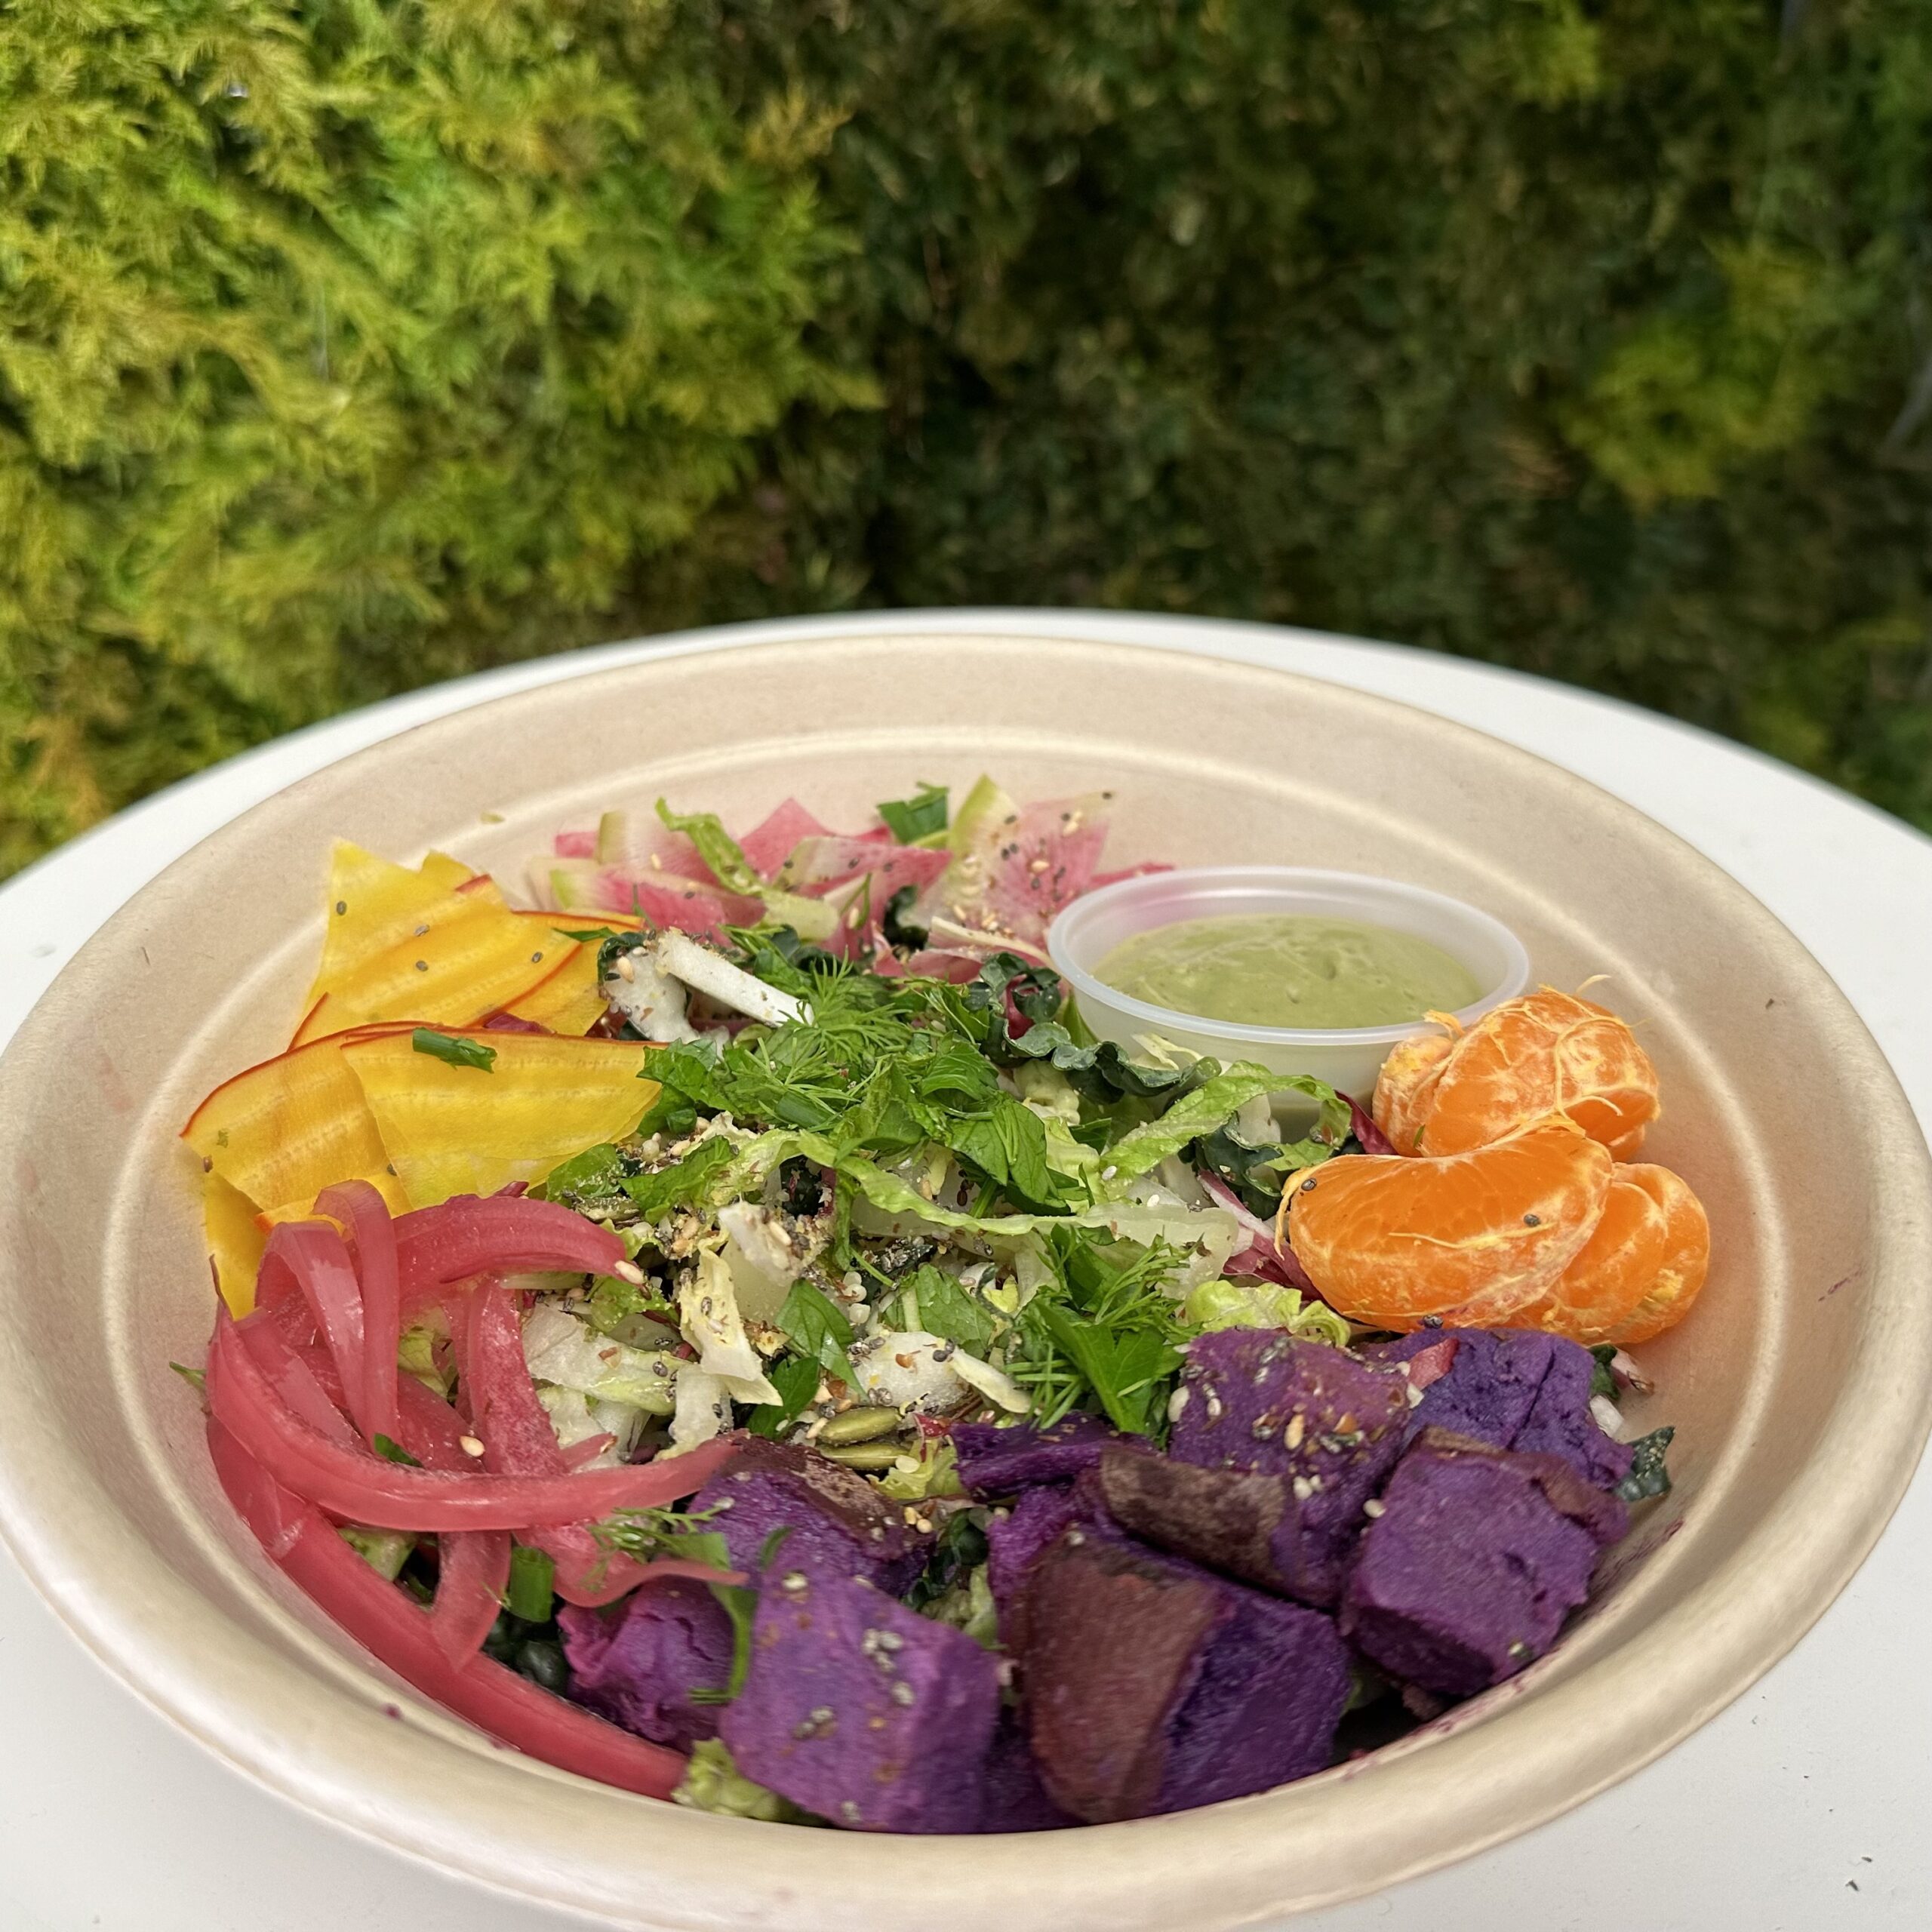 Colorful salad in front of living wall